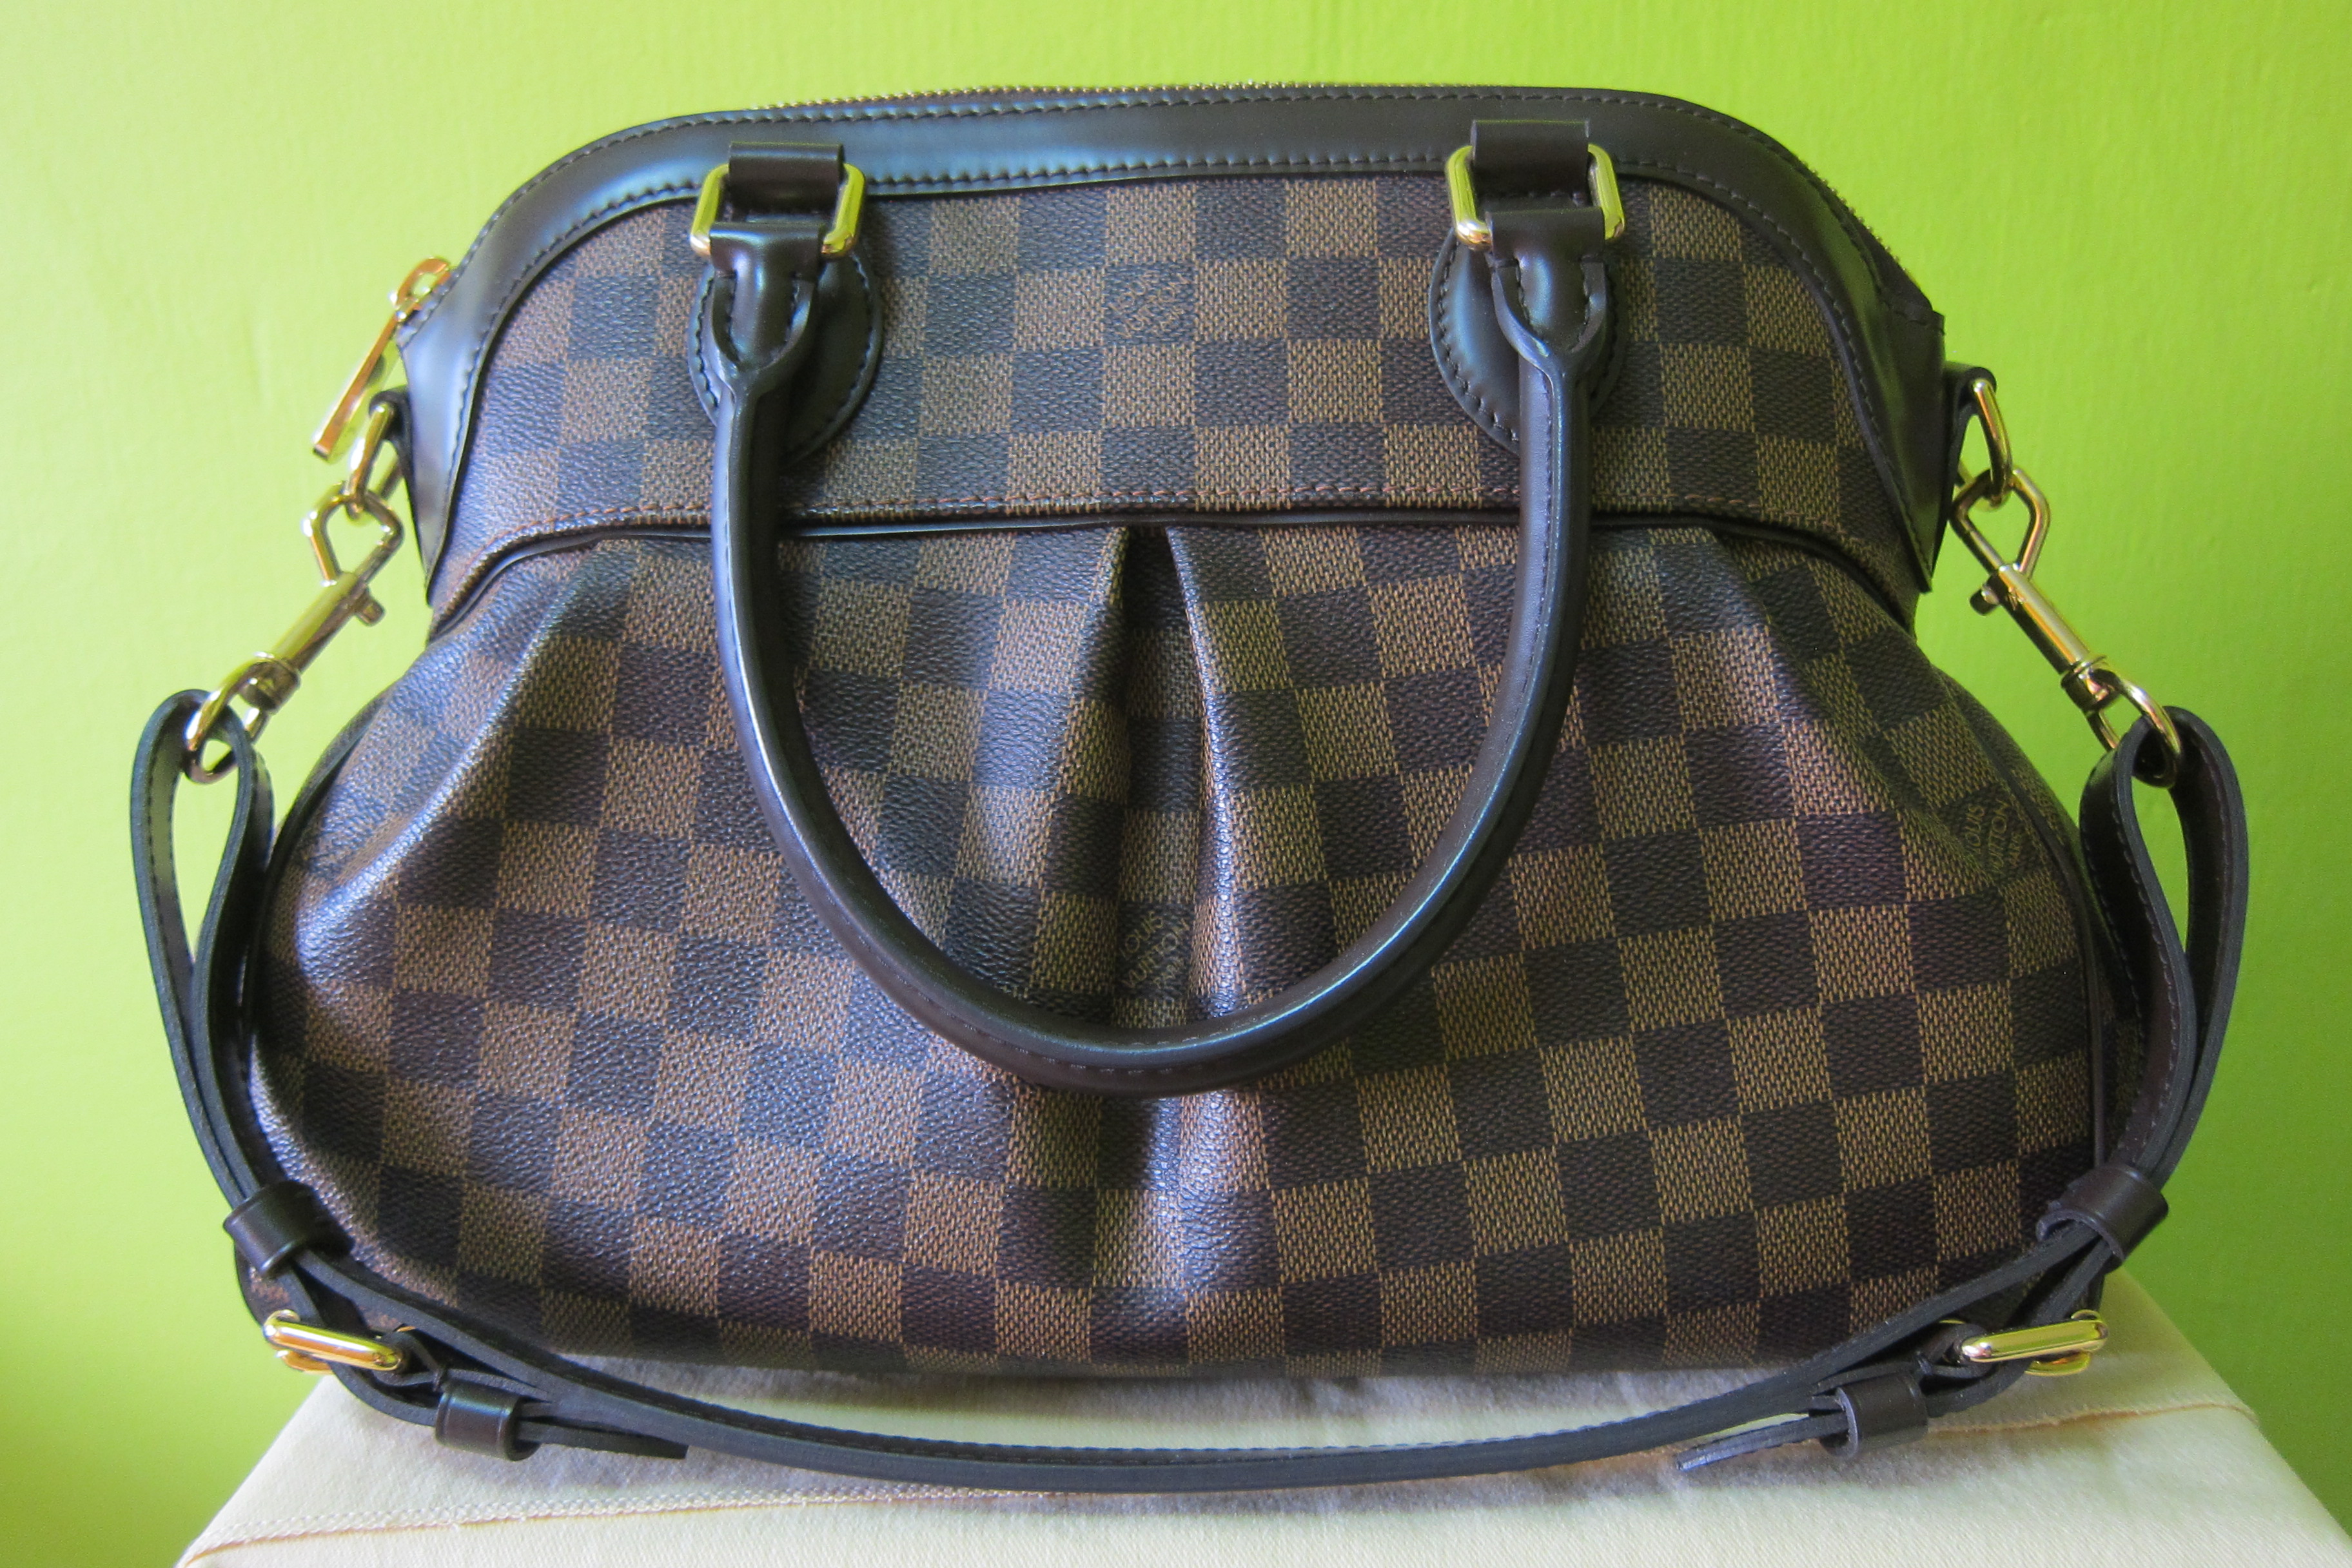 Louis Vuitton Official Website With Price | Confederated Tribes of the Umatilla Indian Reservation